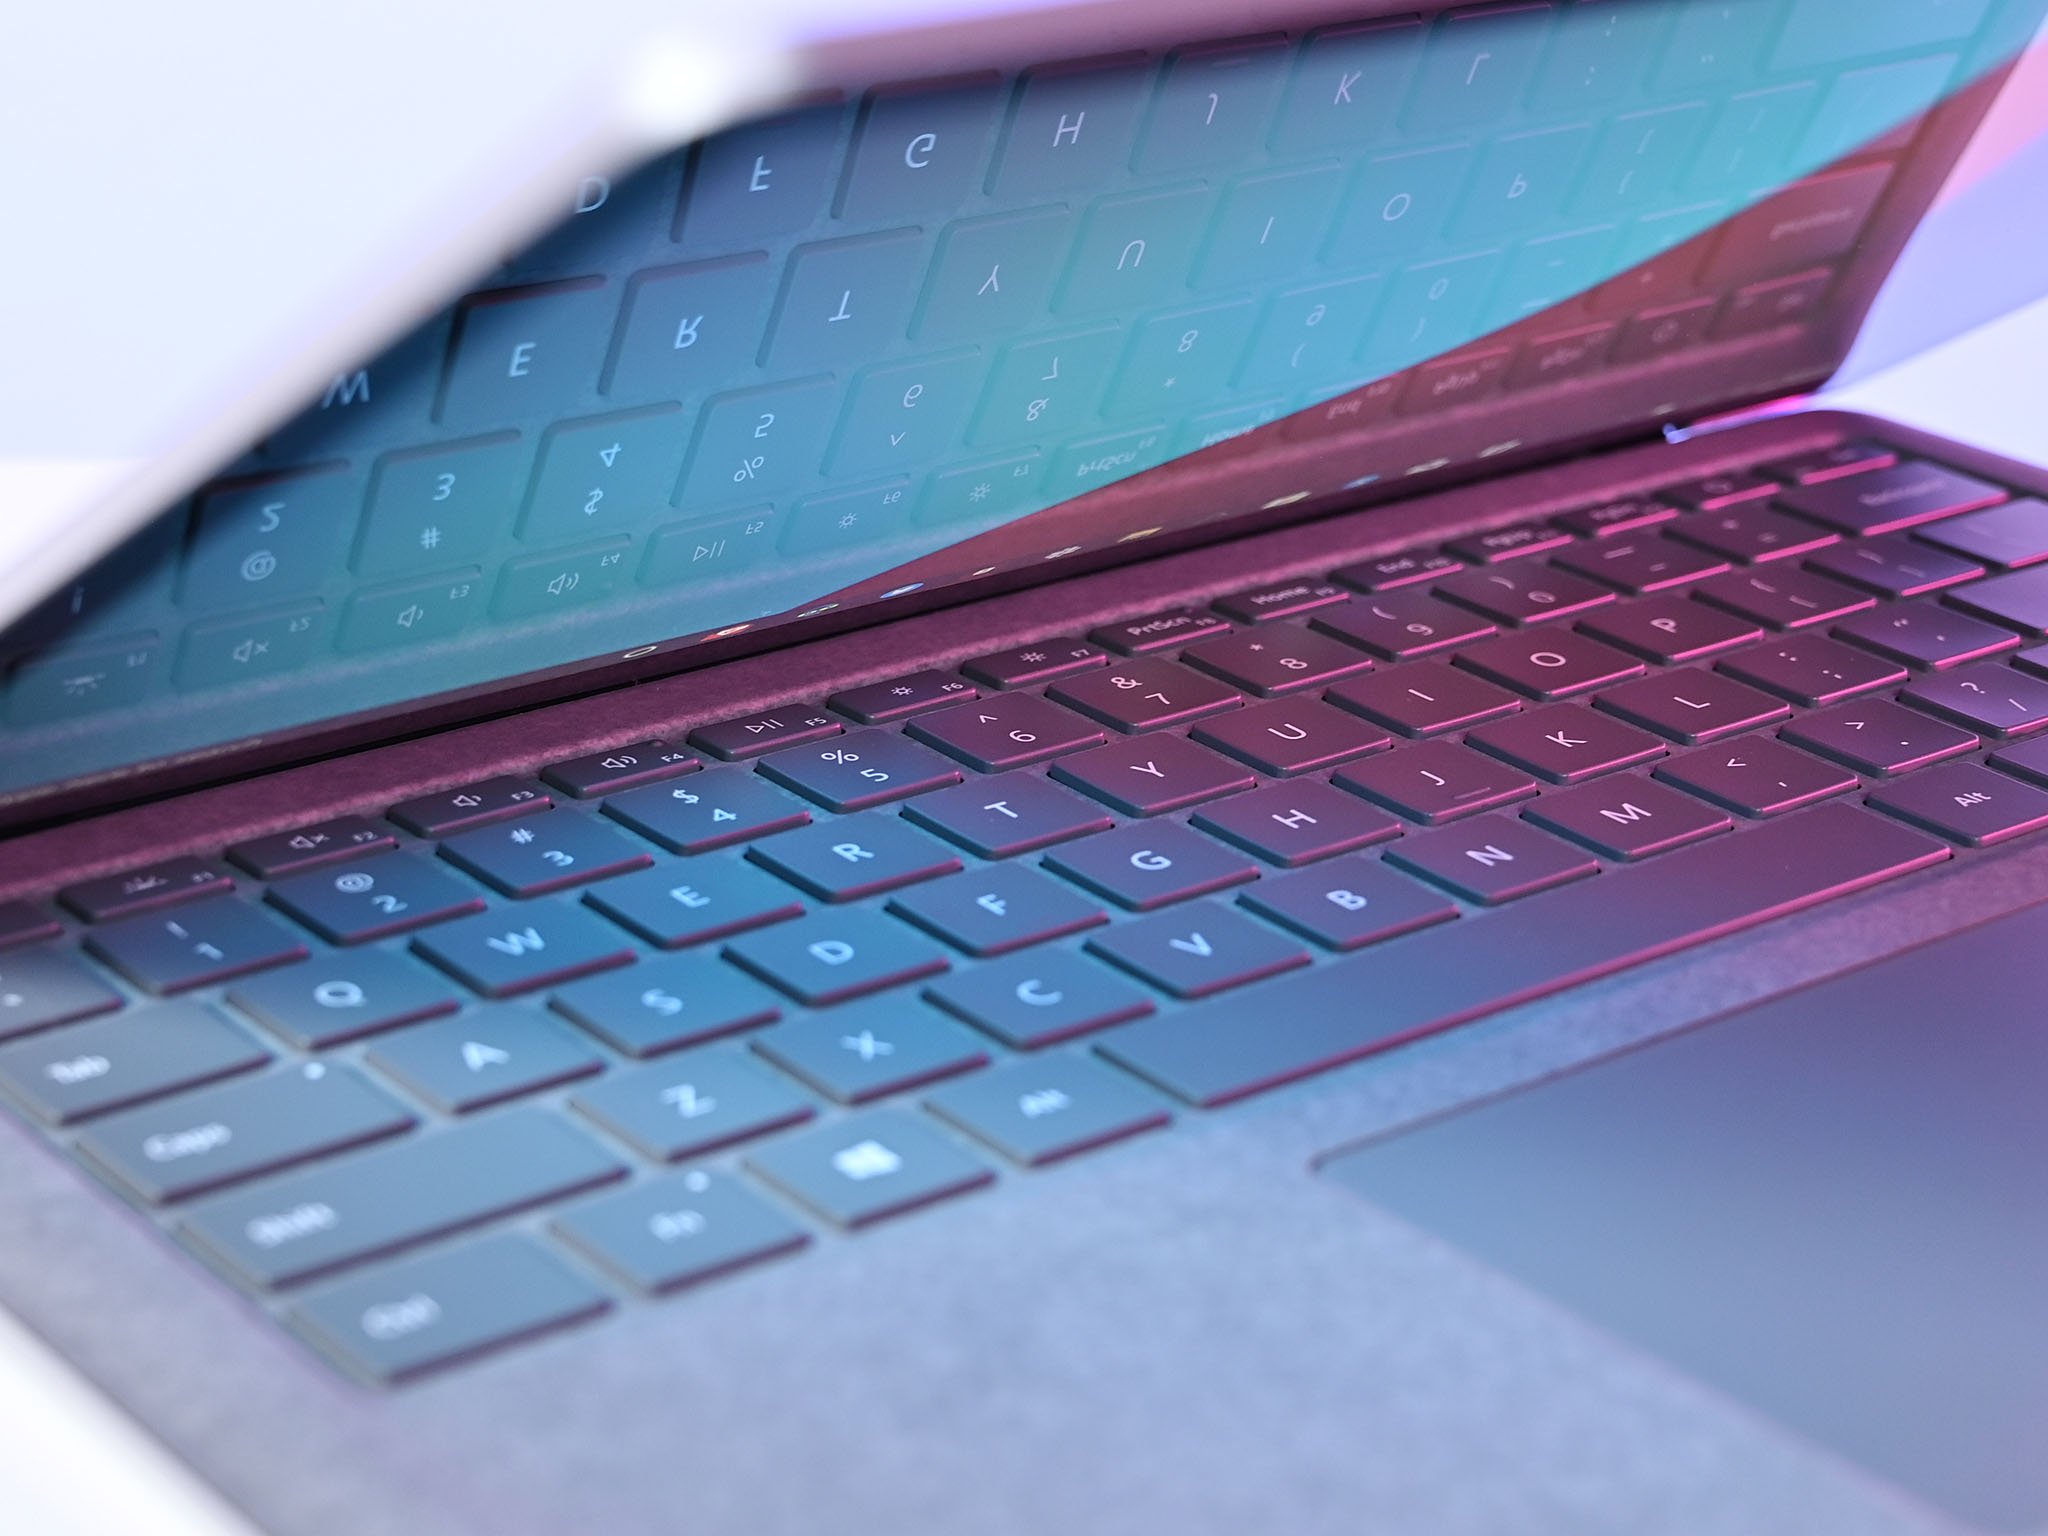 Microsoft Surface Laptop 4: Specs, features, pricing, availability